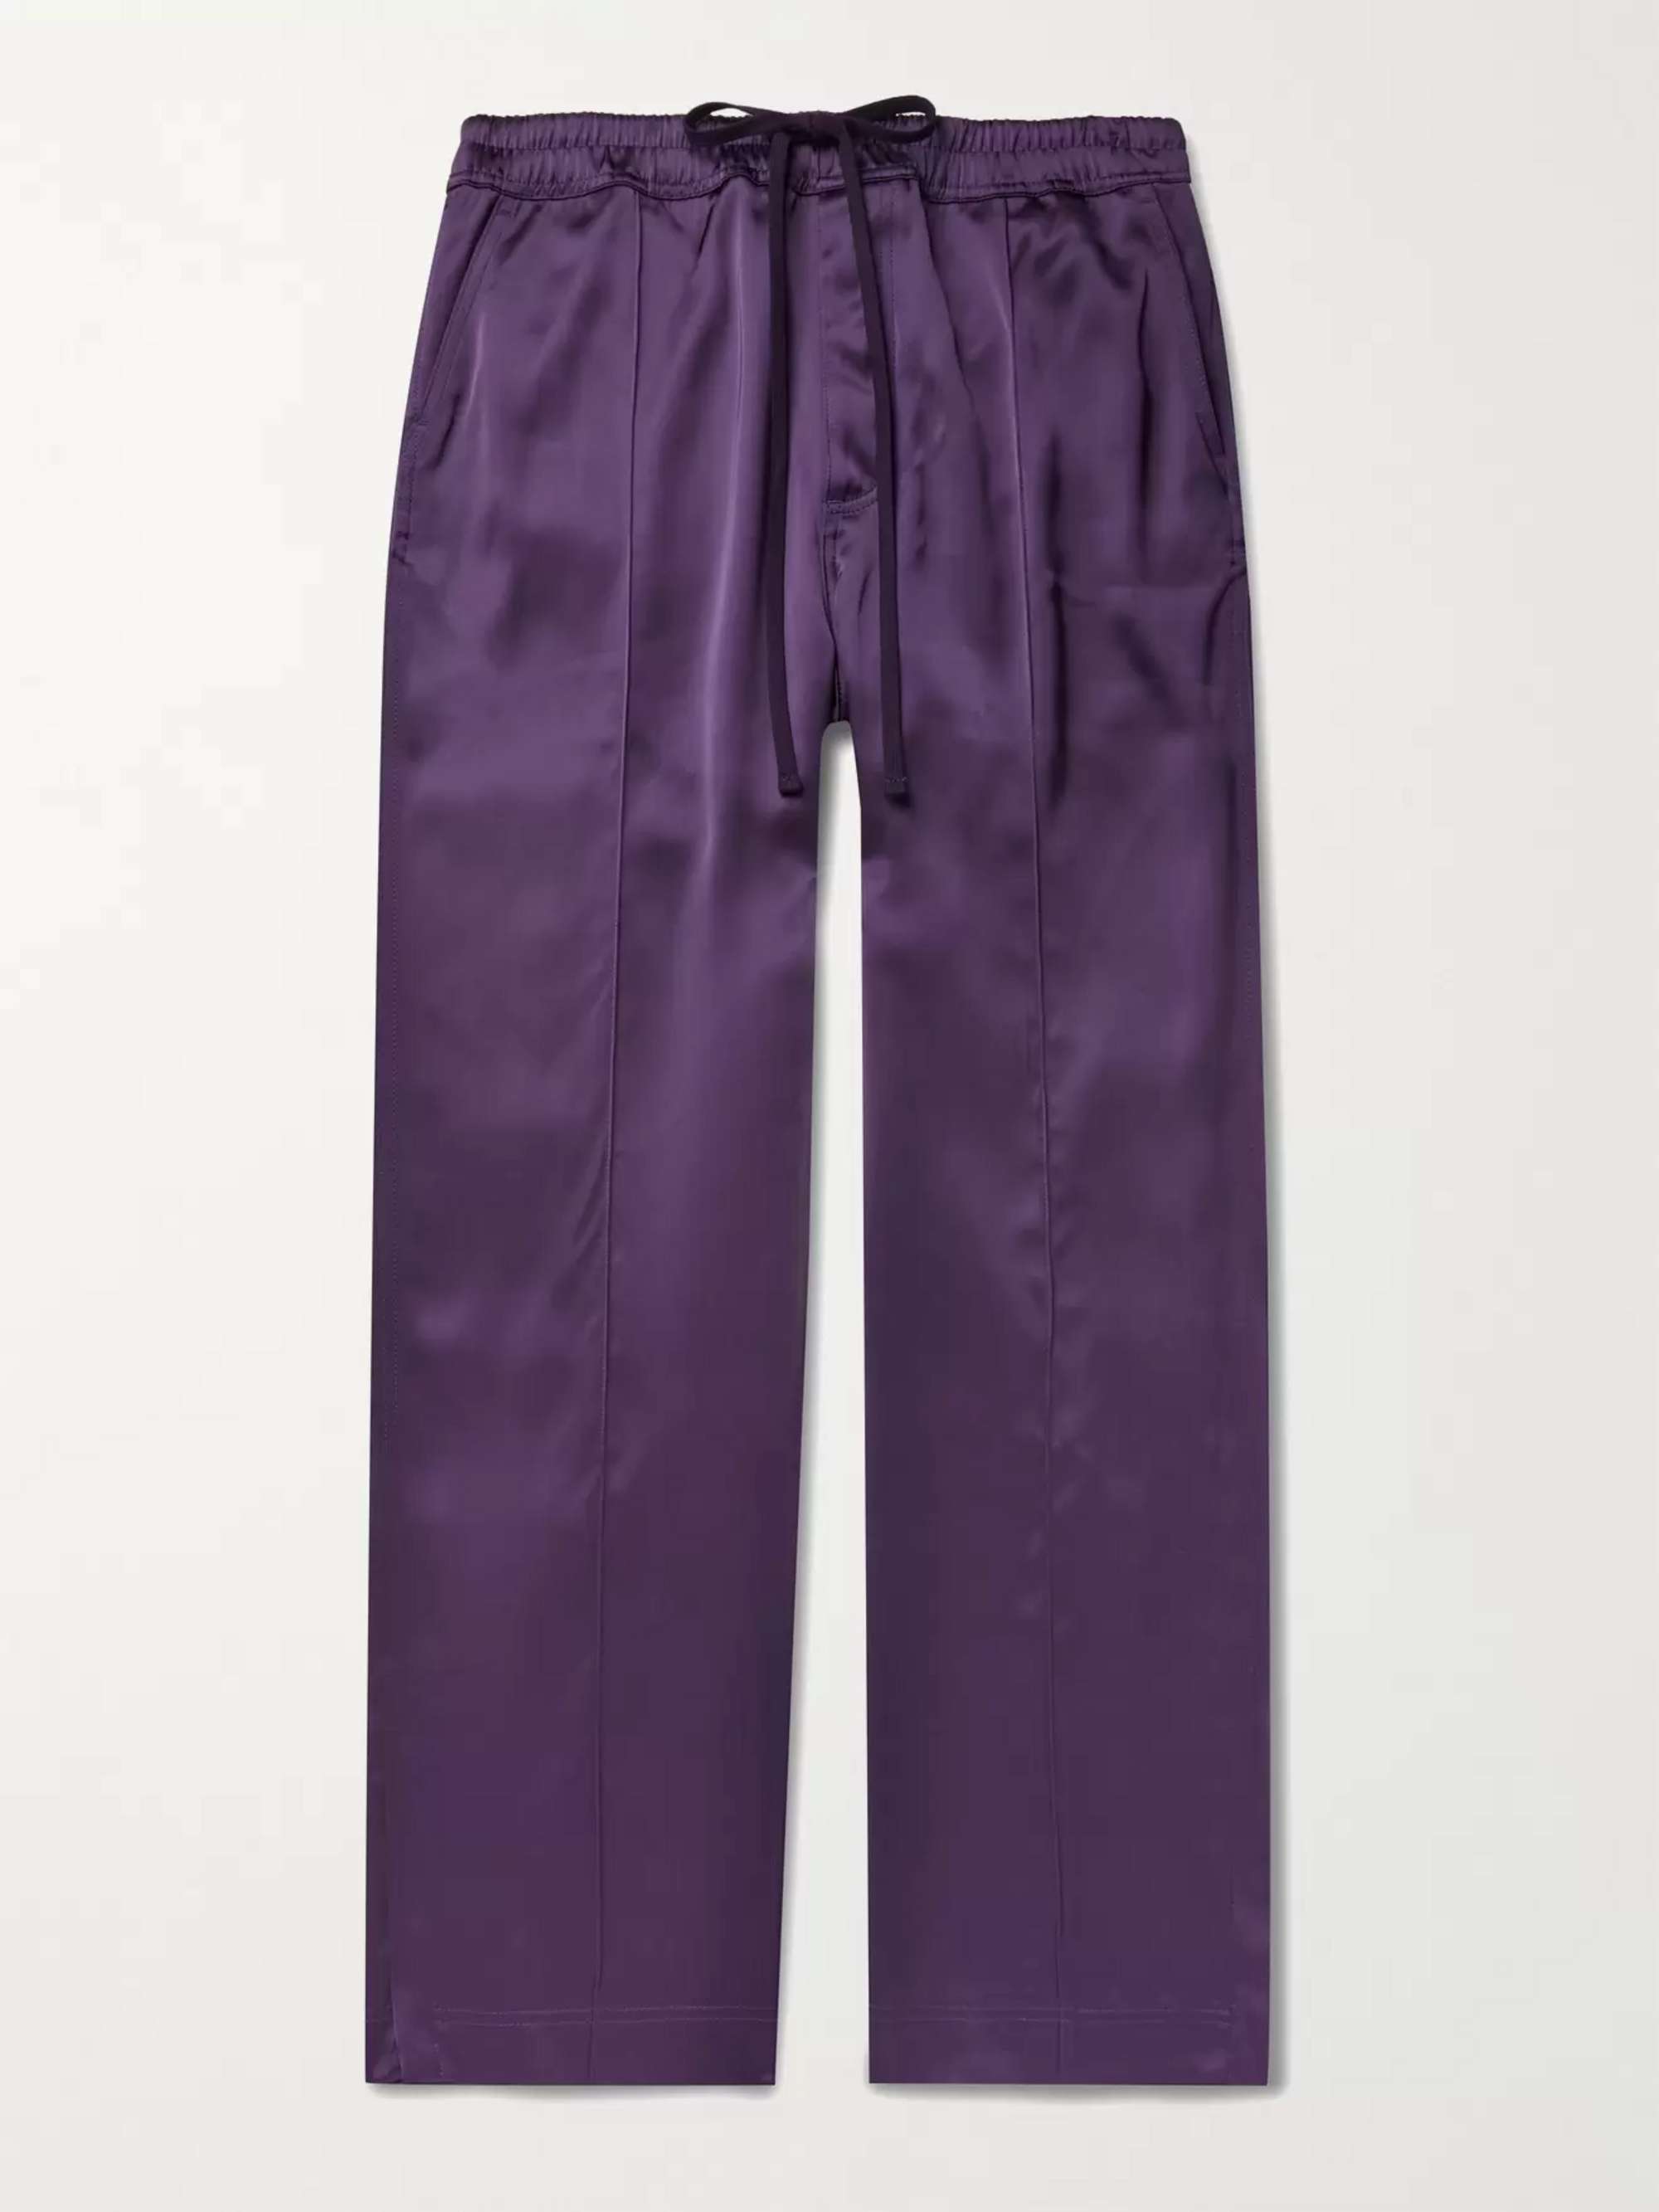 TOM FORD Satin-Jersey Track Pants